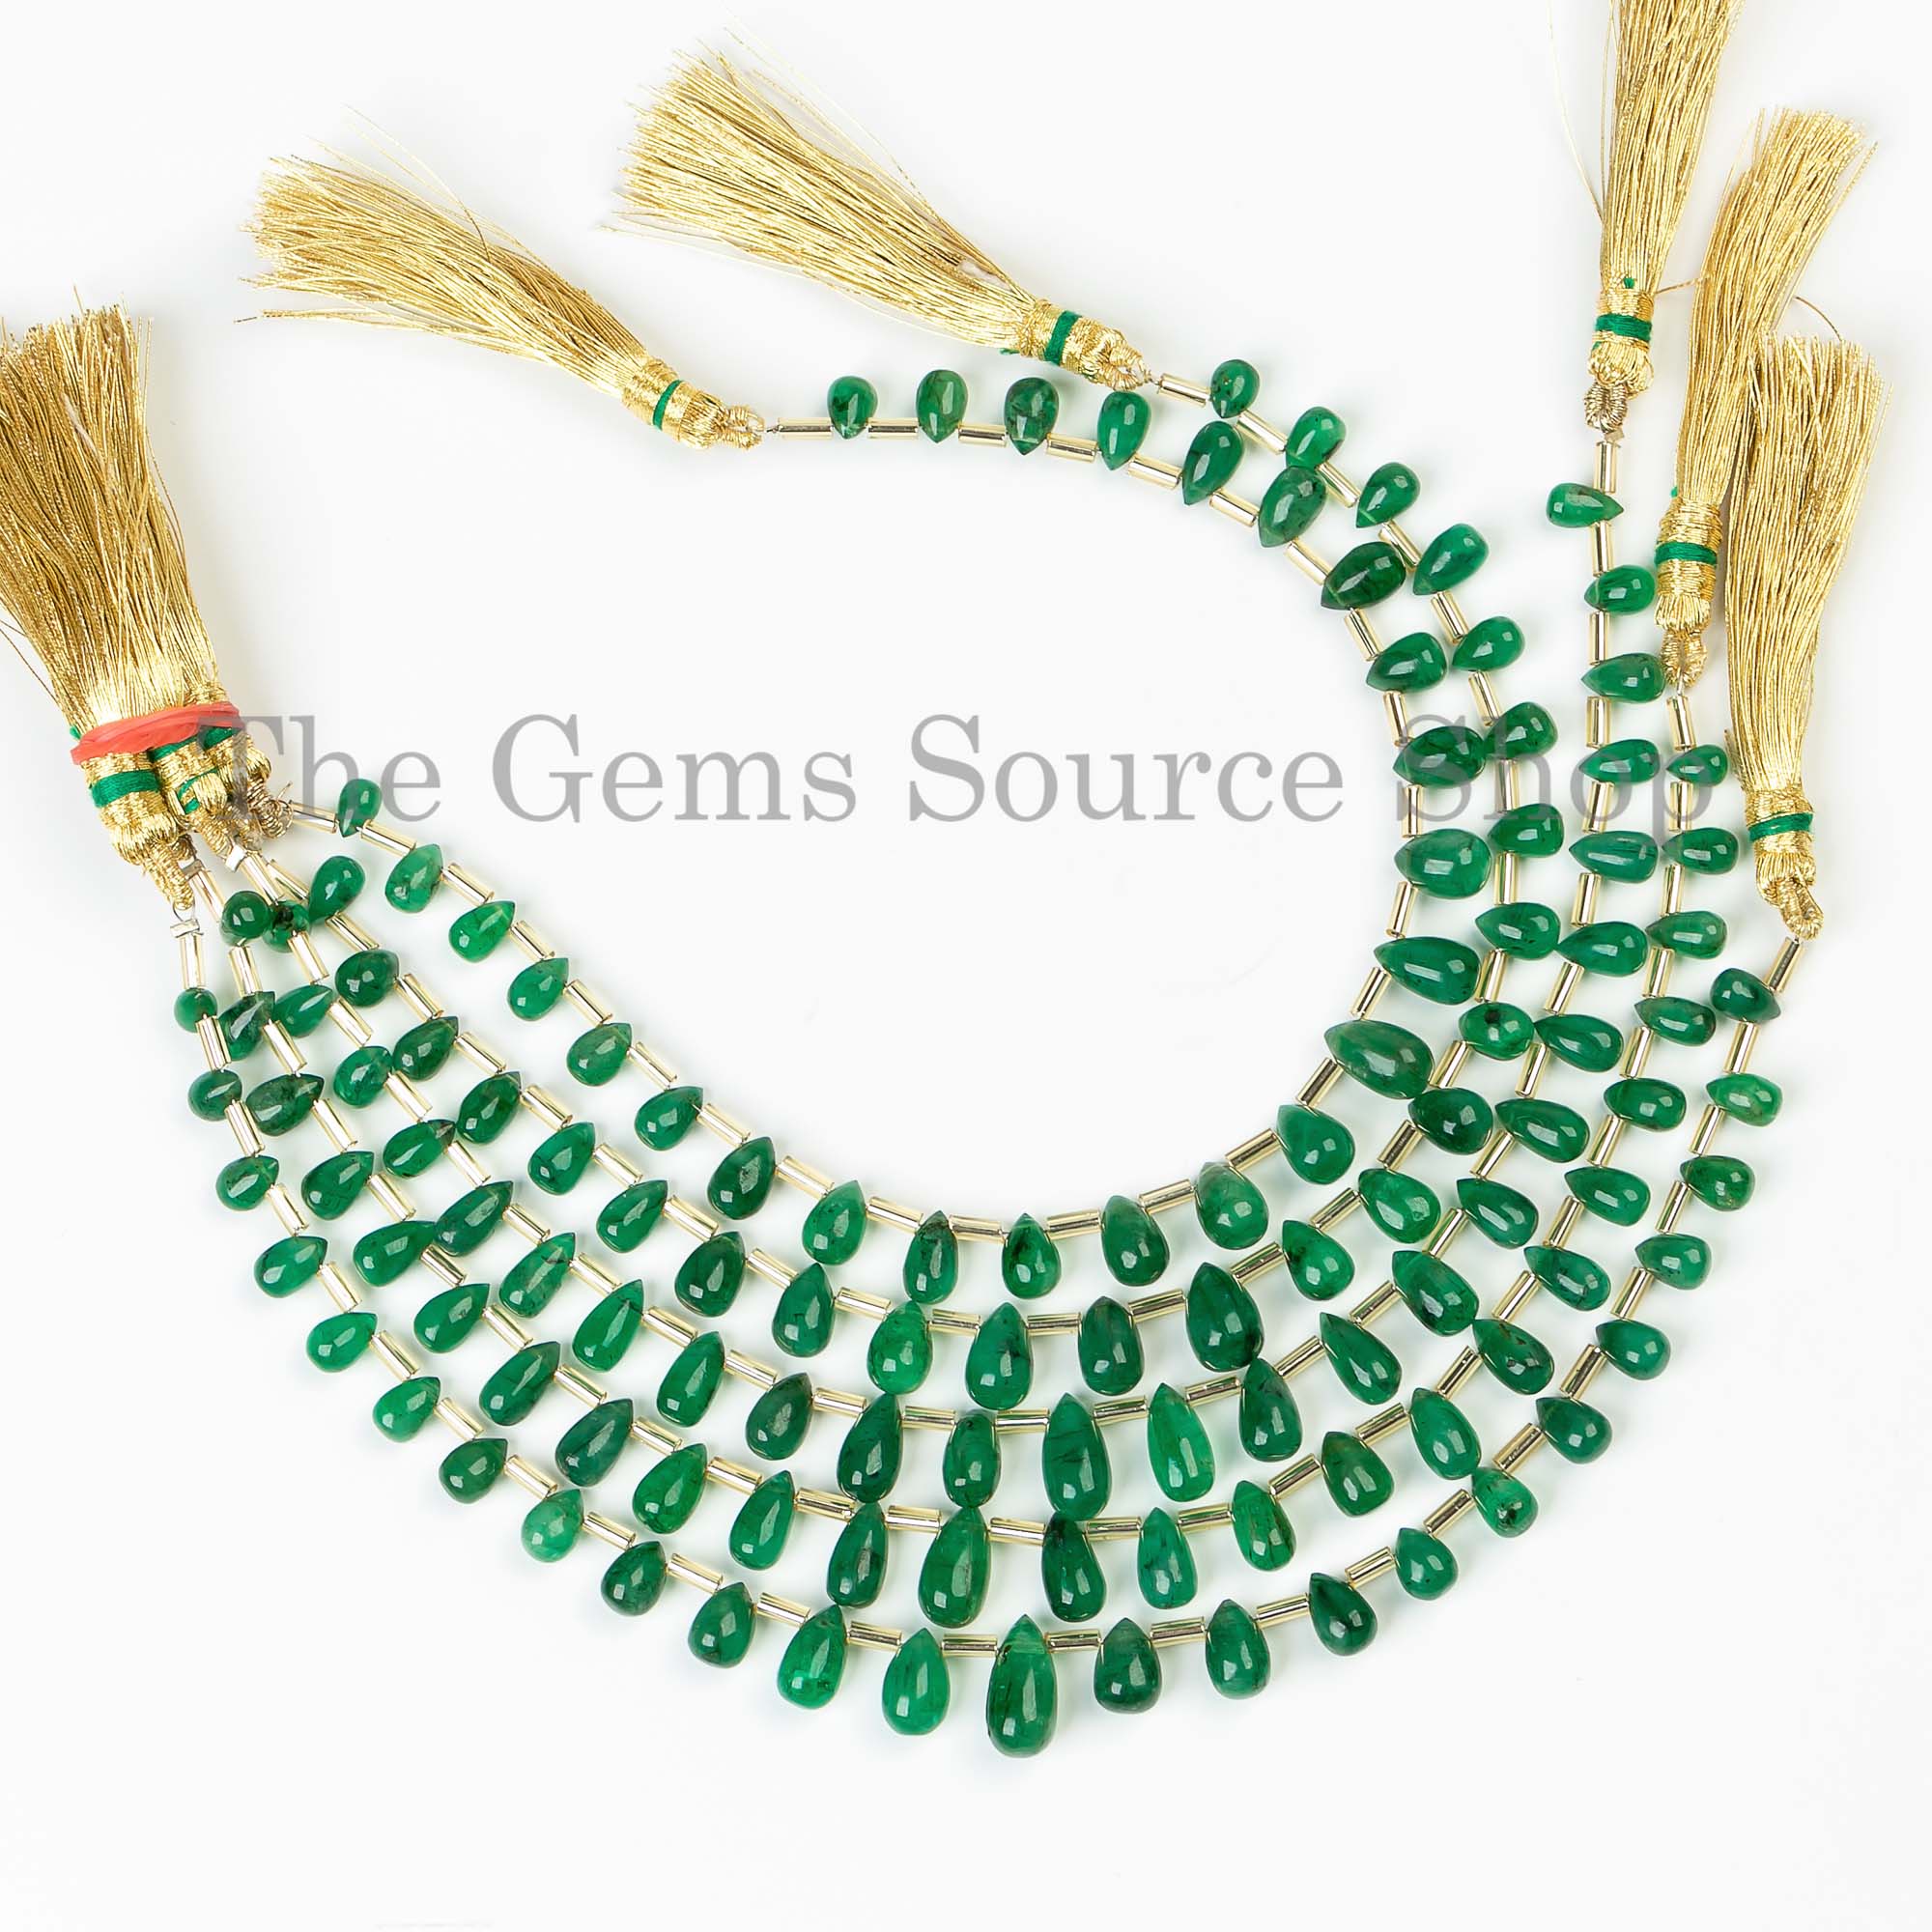 Extremely Rare Natural Emerald Smooth Beads, Emerald Drop Shape Beads, Plain Emerald Beads